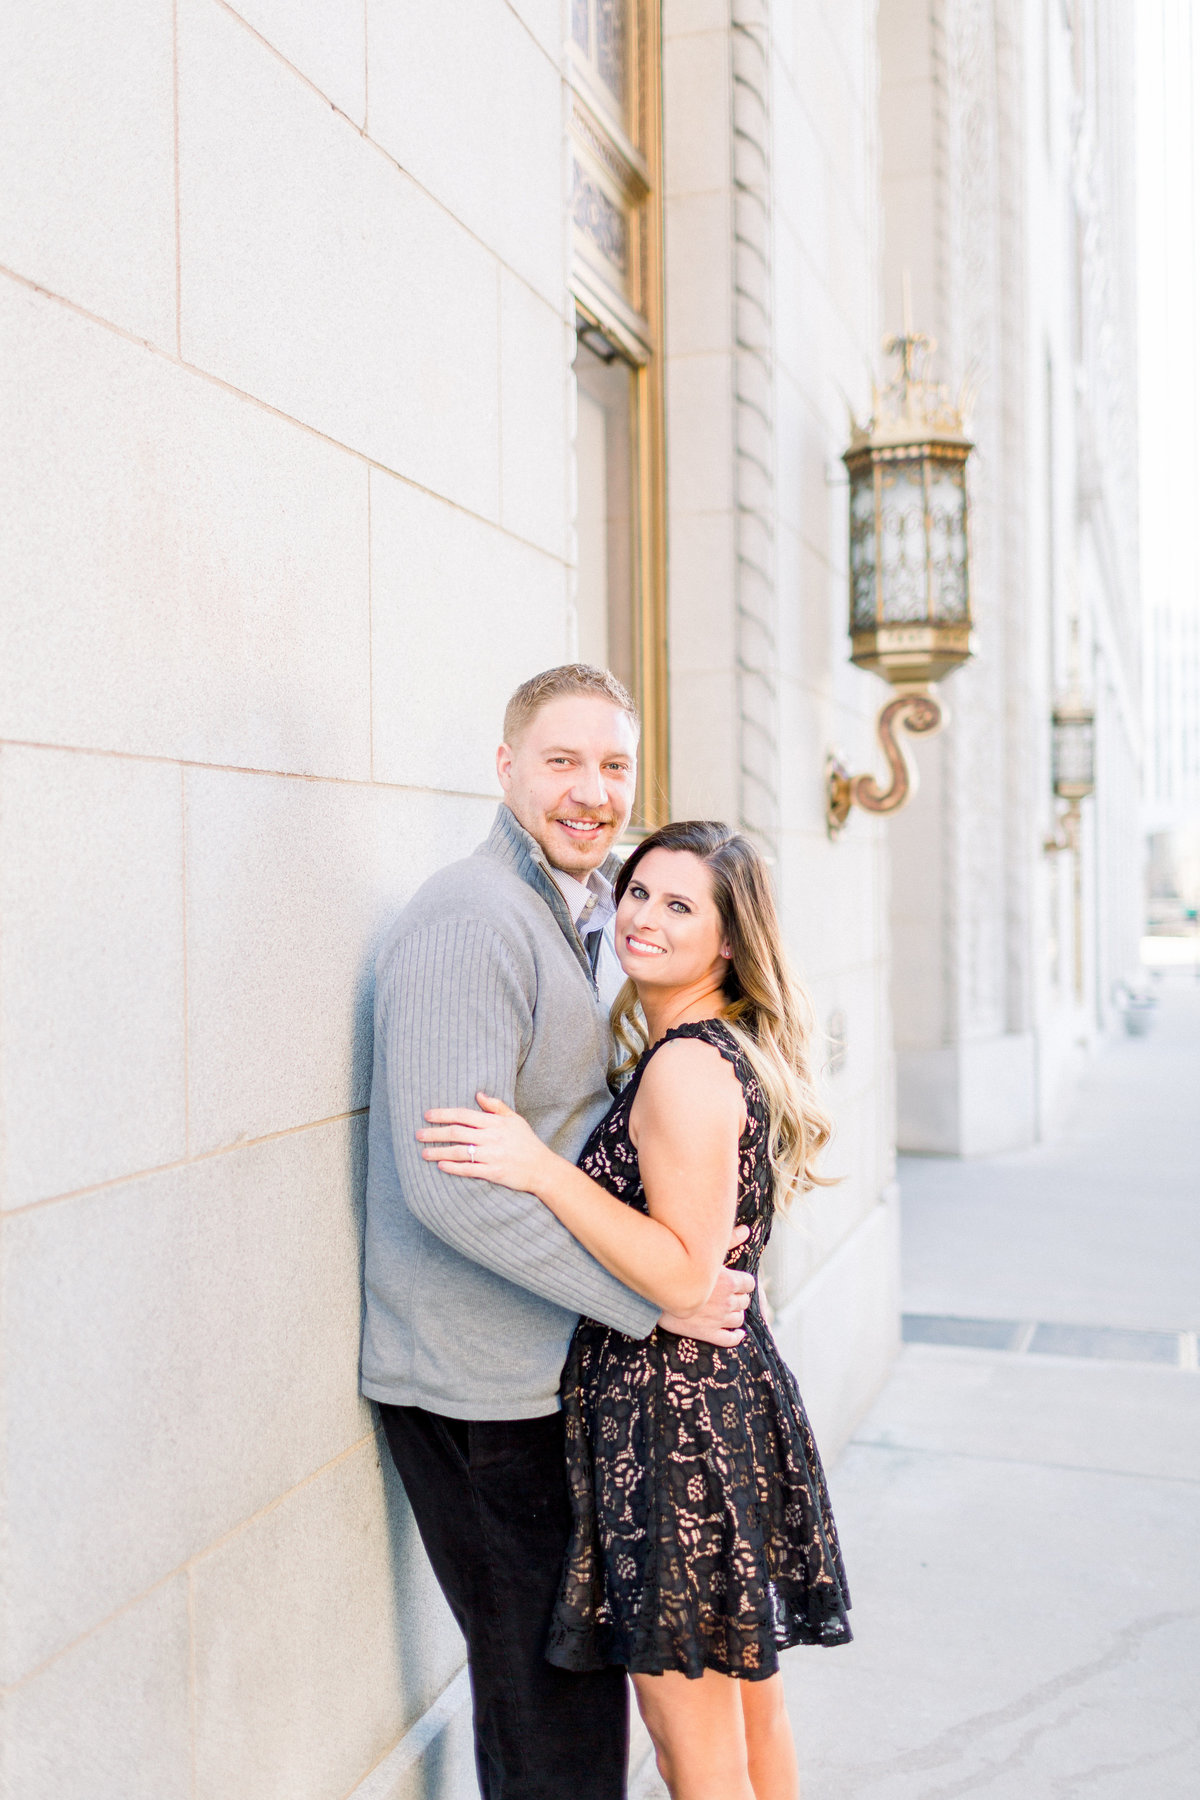 Galleries-Nathan and Jaime Engagement Session-0001